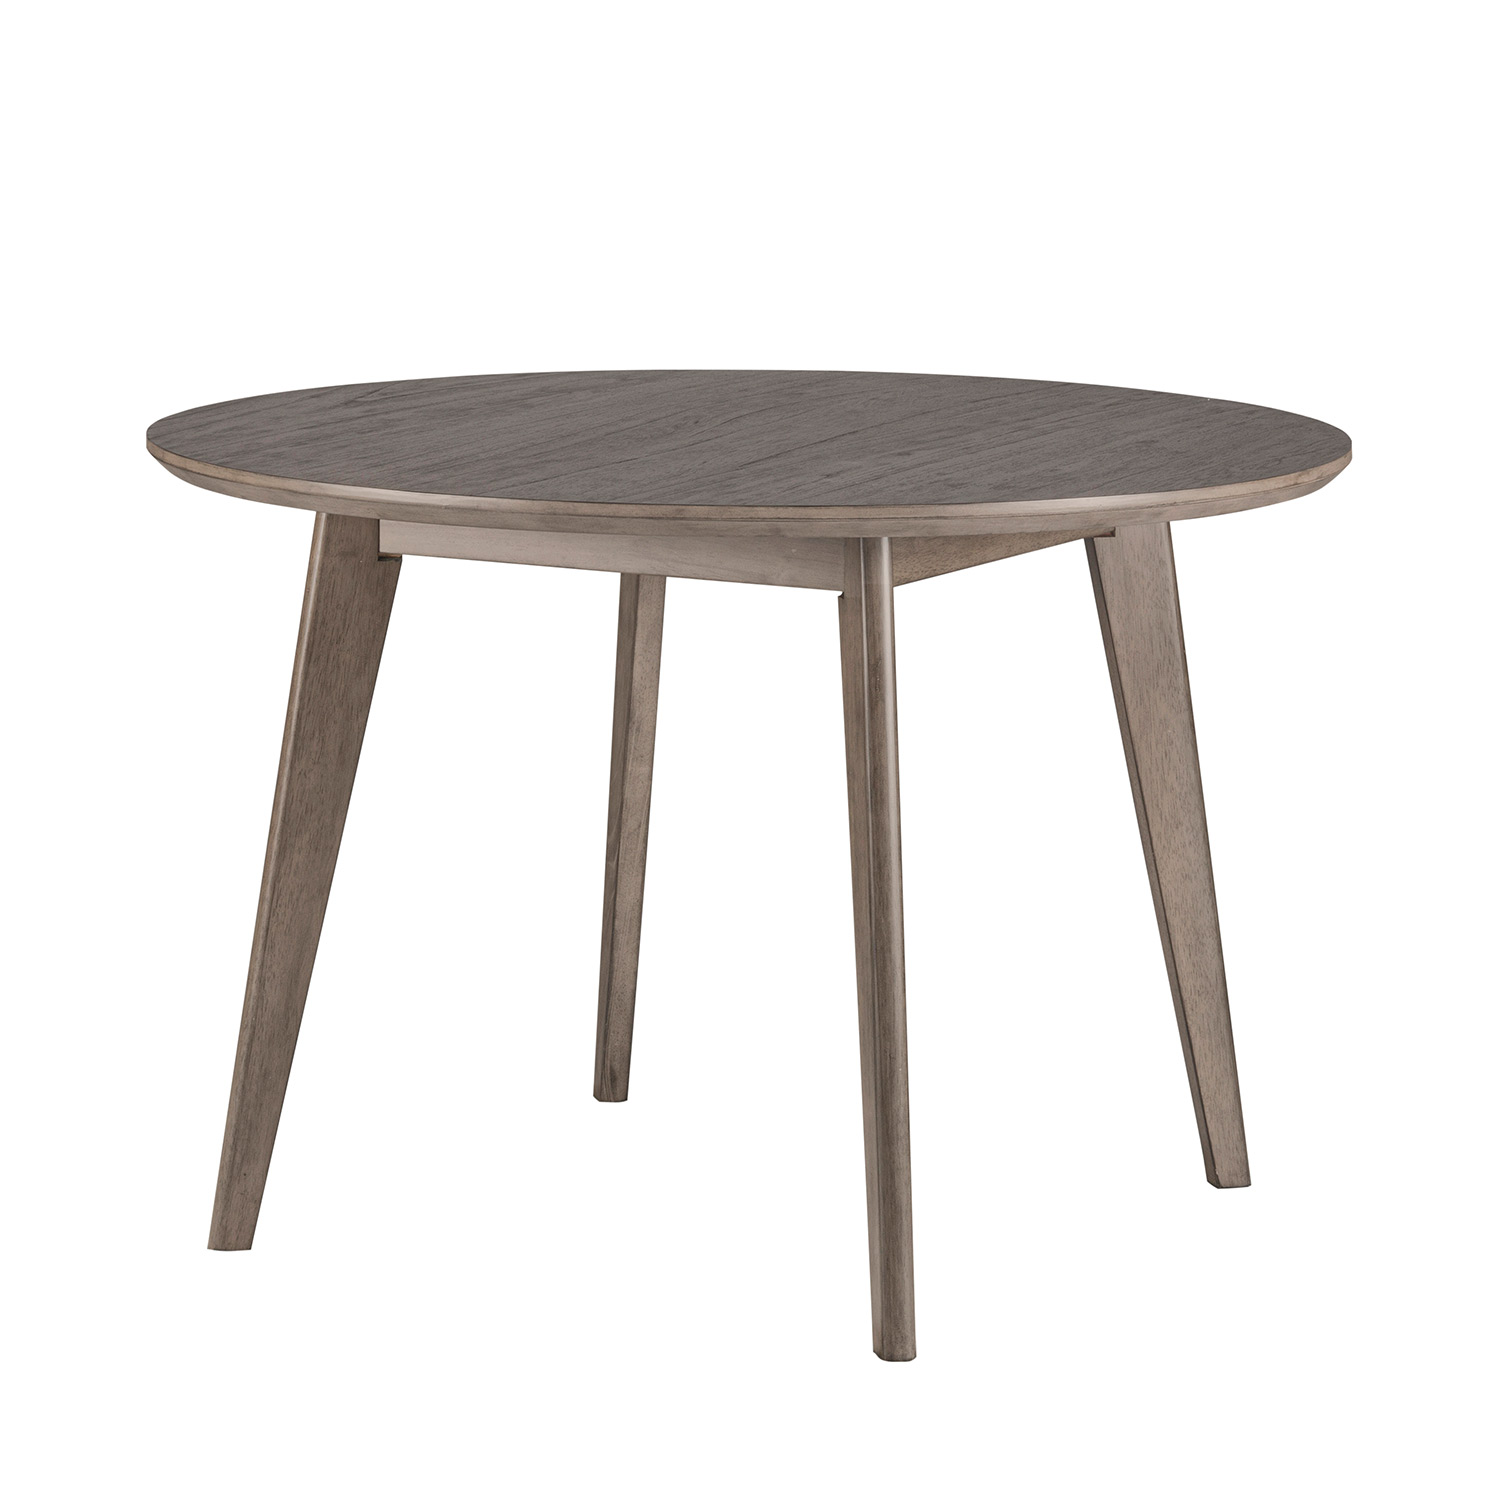 Hillsdale Alden Bay Modern Round Wood Dining Table - Weathered Gray